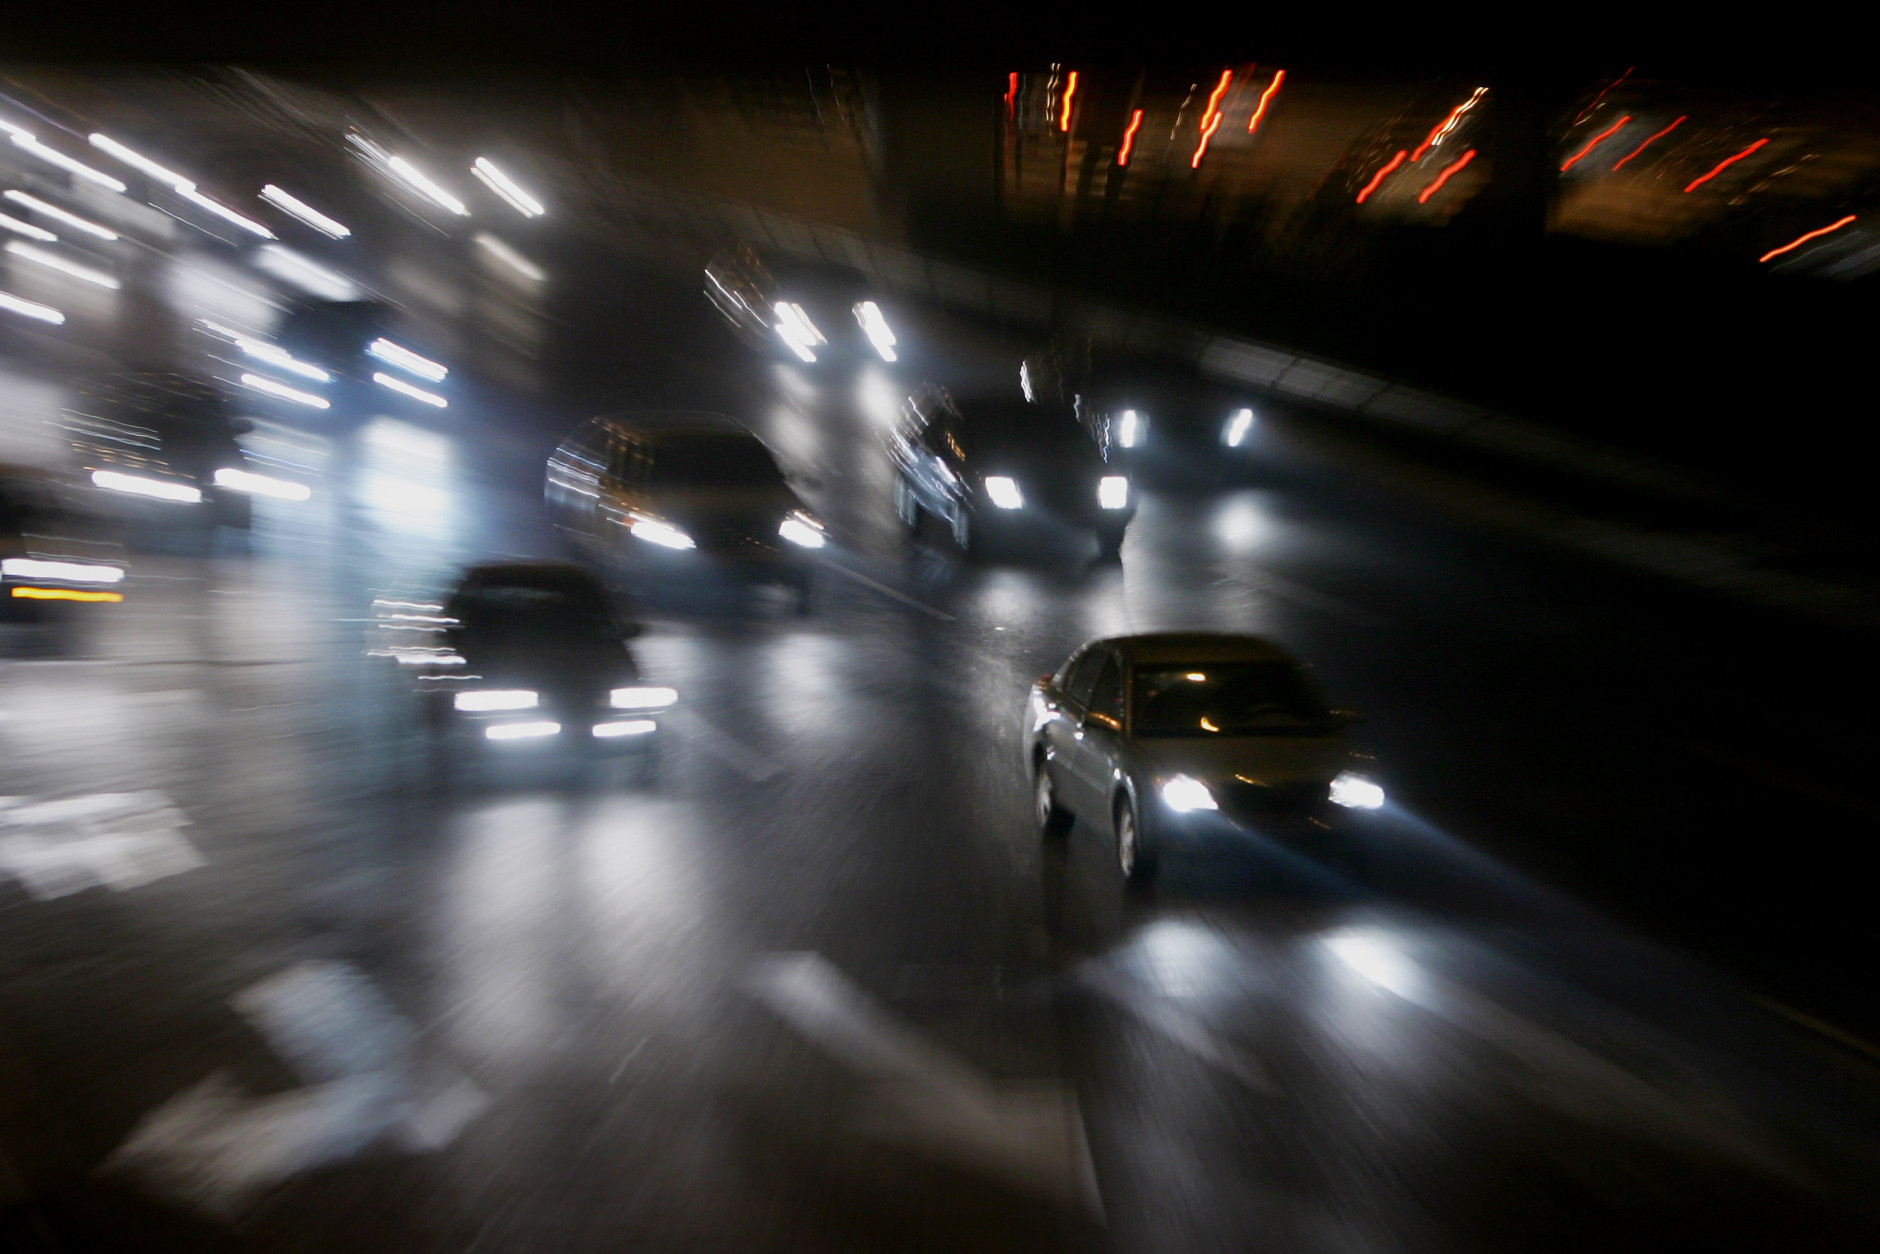 If headlights coming at you at night blind you, there's a safe way to keep your vision.  (Photo by Feng Li/Getty Images)